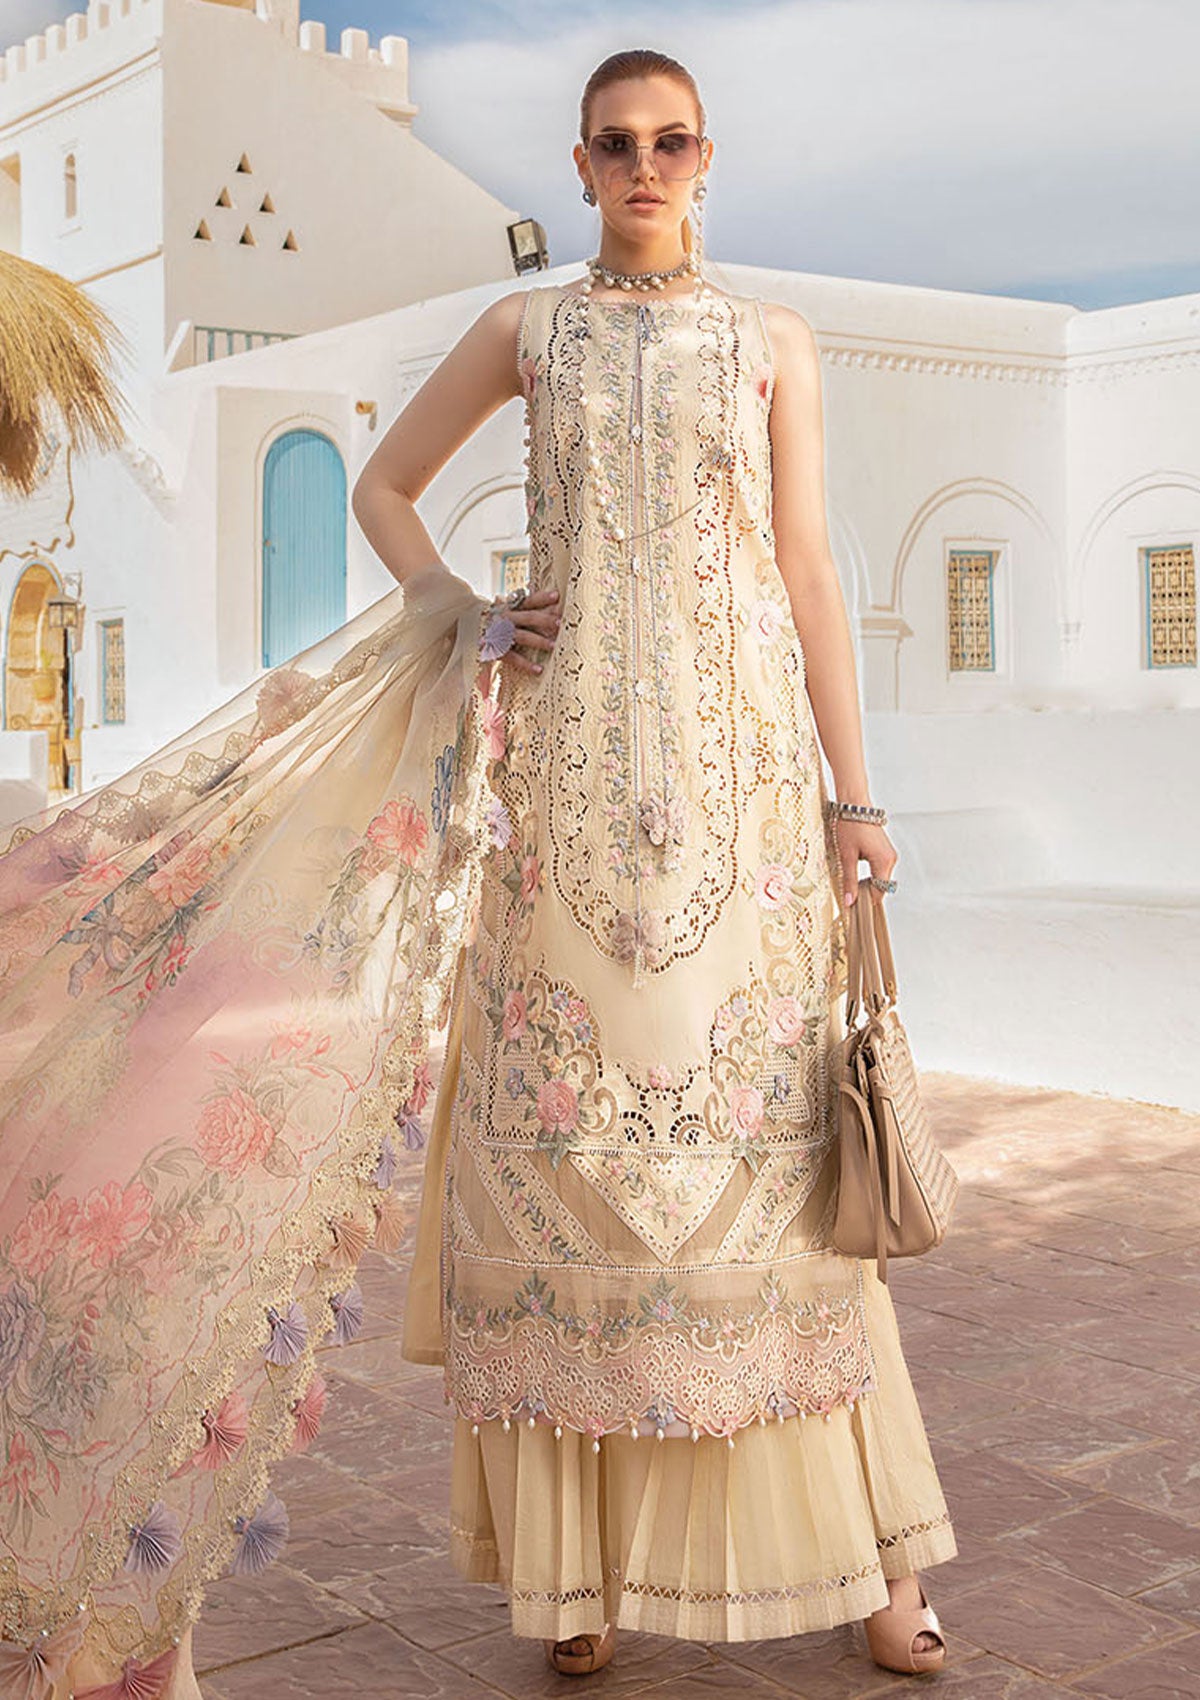 Lawn Collection - Maria B - Voyage a'Luxe - Luxury - MB24#06B